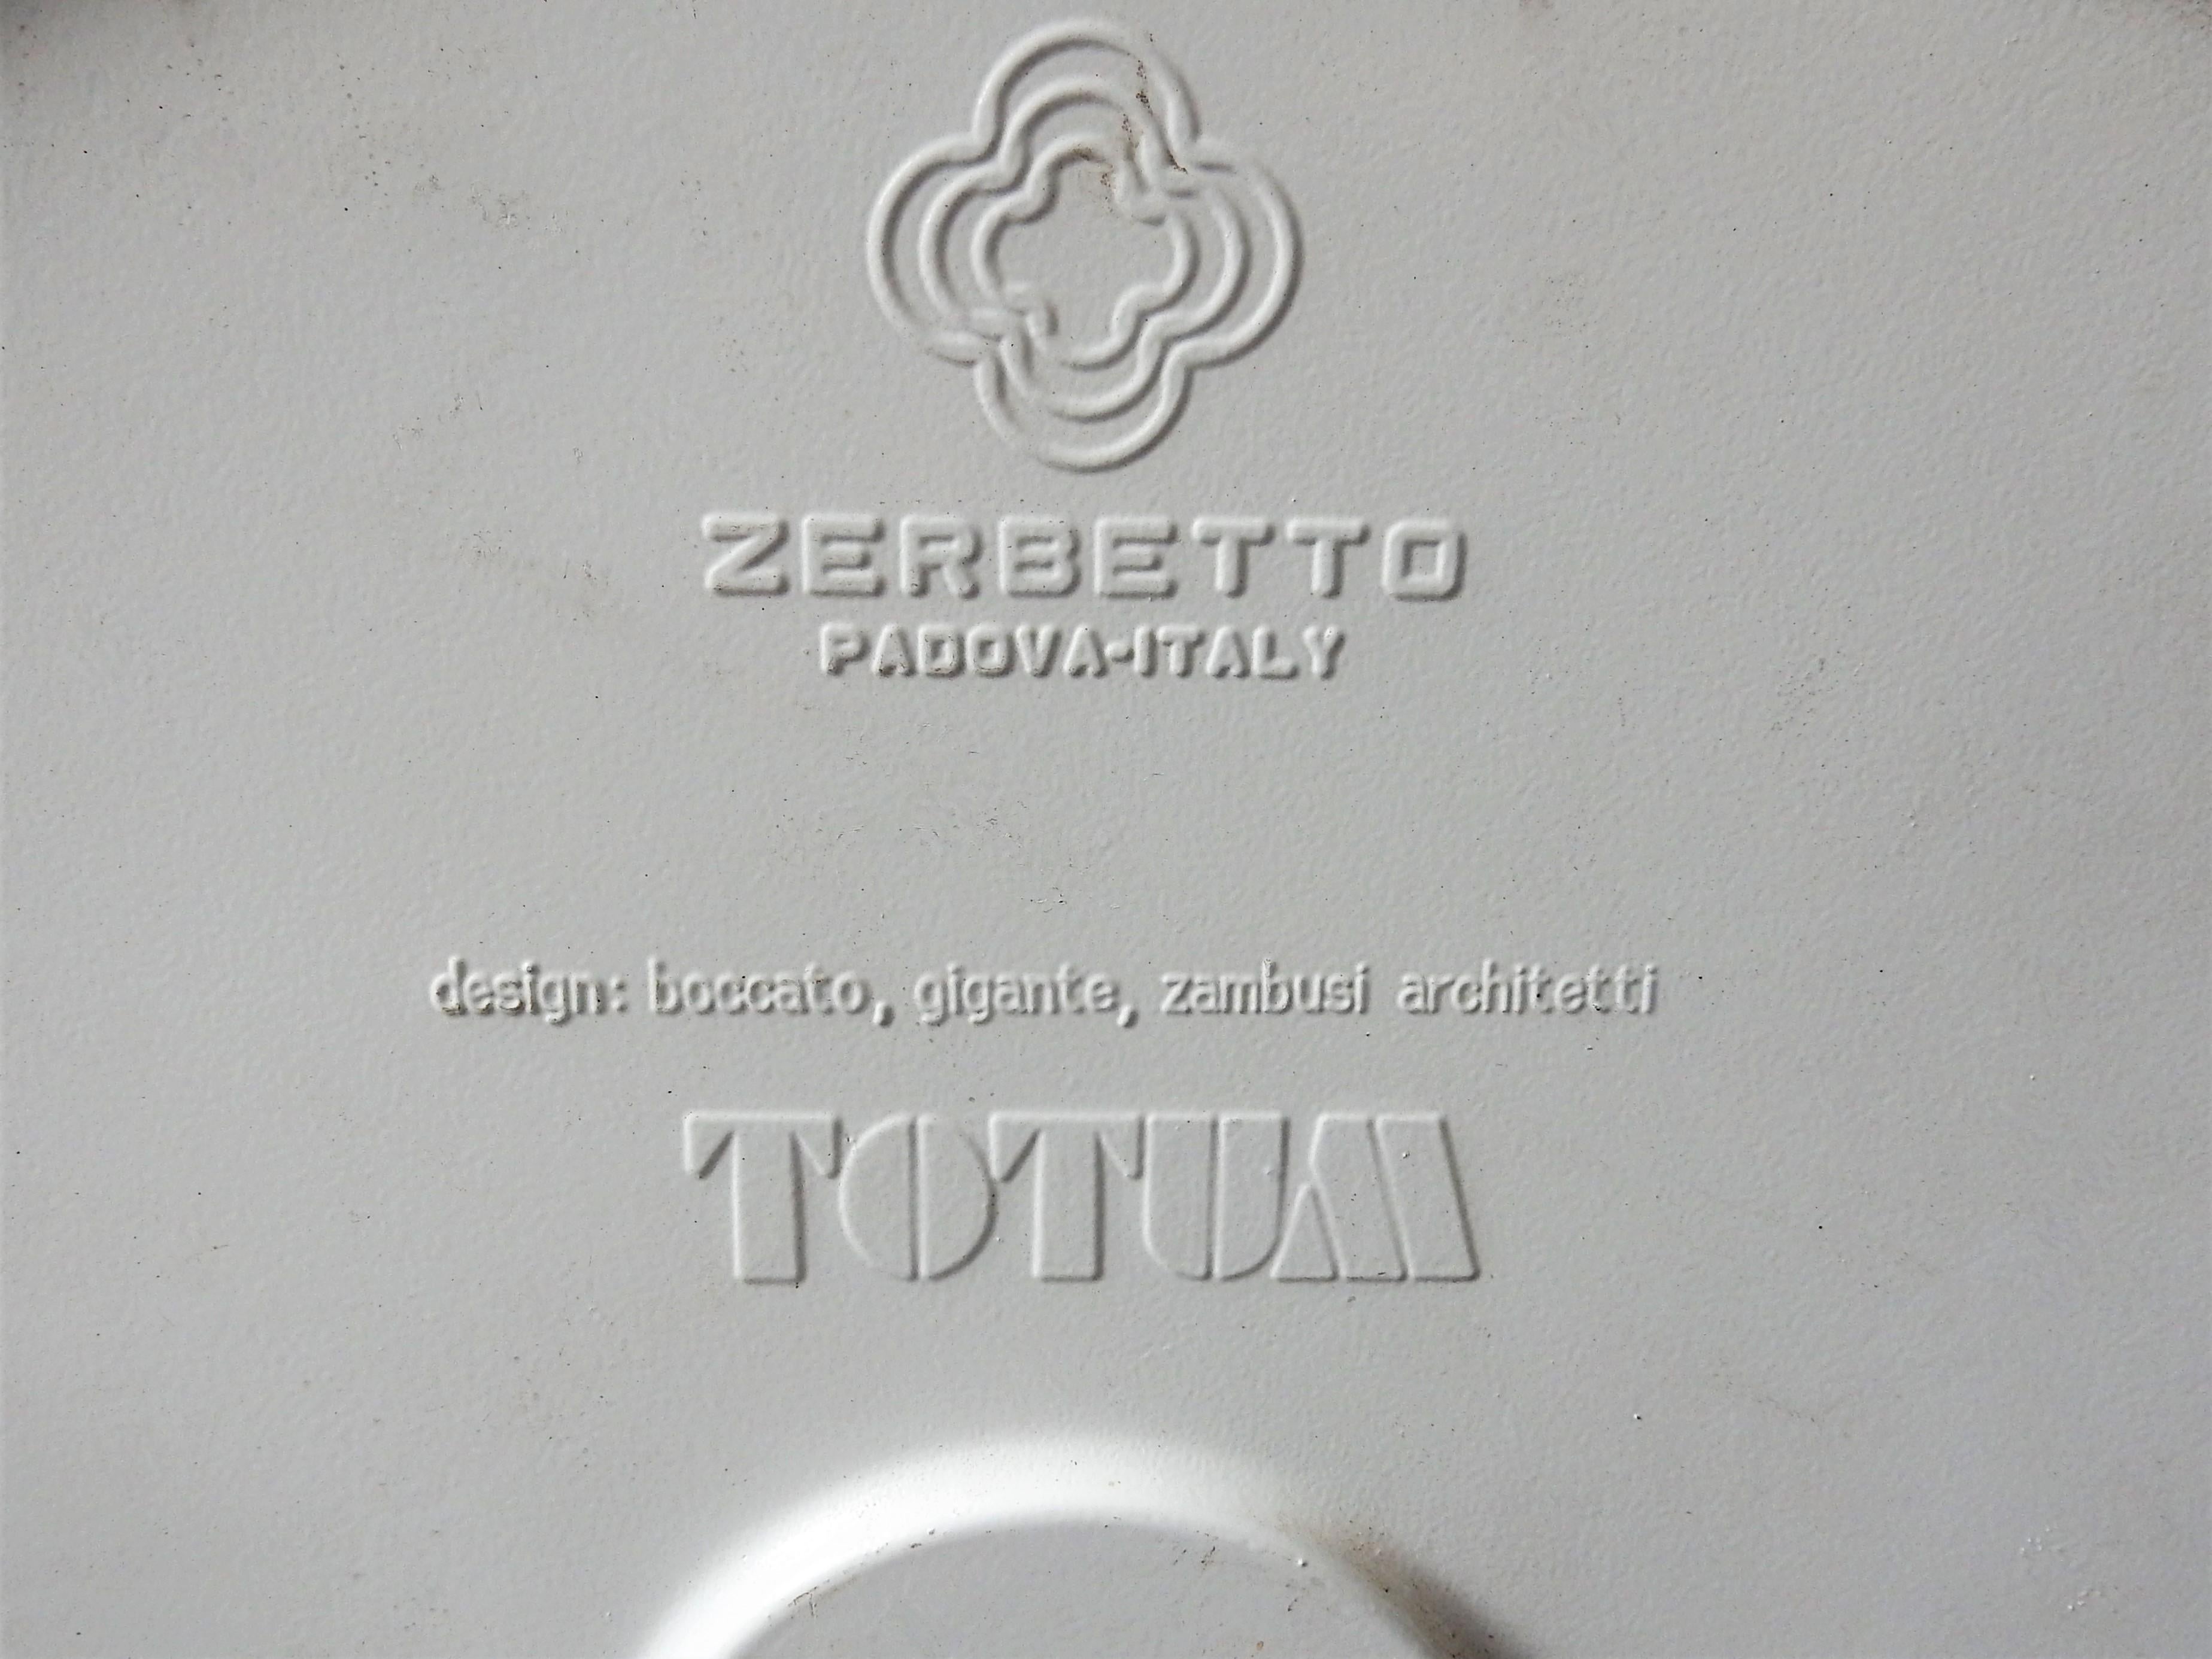 Italian Totum Wall/Ceiling Lamp by Bocatto, Gigante and Zambusi for Zerbetto 4 Available For Sale